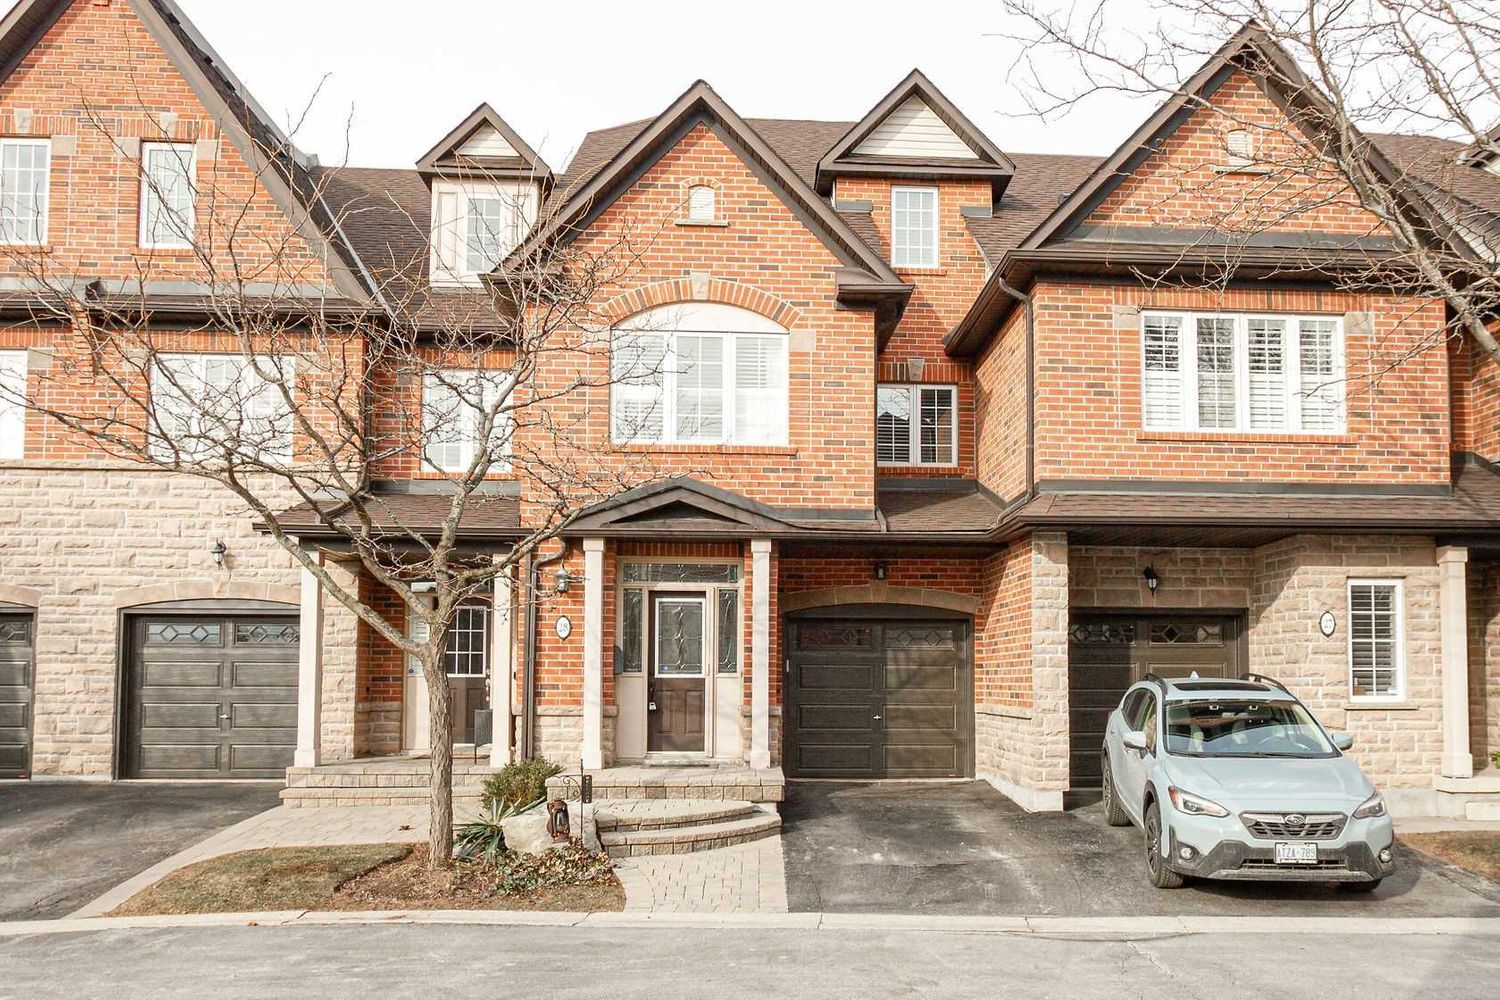 300 Ravineview Way. 300 Ravineview Way Townhomes is located in  Oakville, Toronto - image #2 of 2